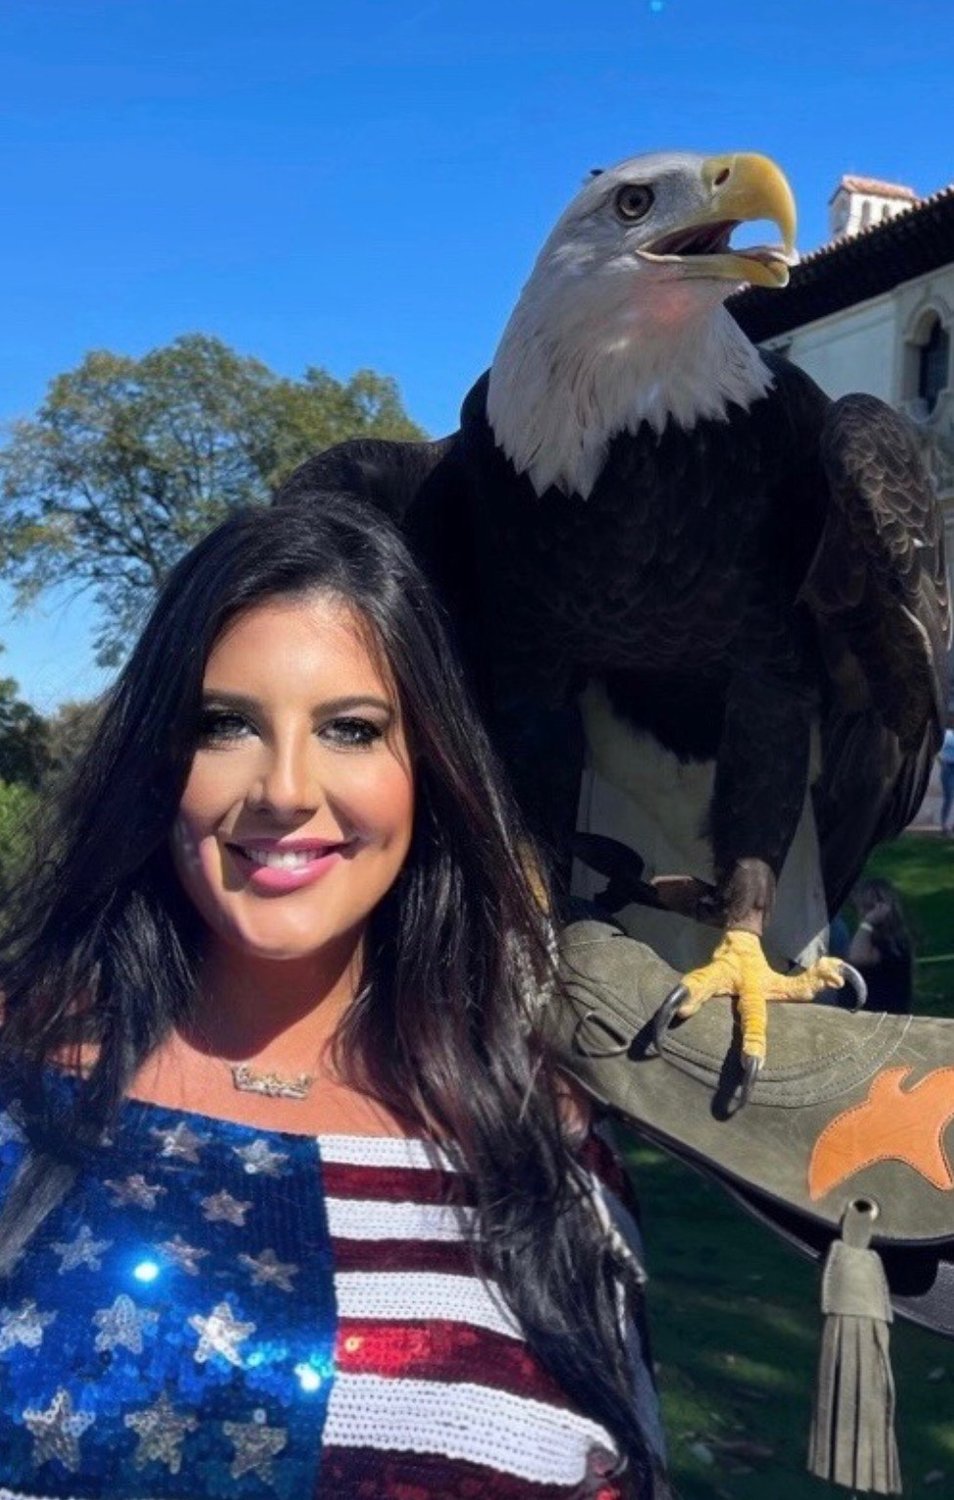 Chelsea Euliano, of Oceanside, will drop anything at any time to care for animals when needed, even a bald eagle. That is why she is the Herald’s 2021 Person of the Year.